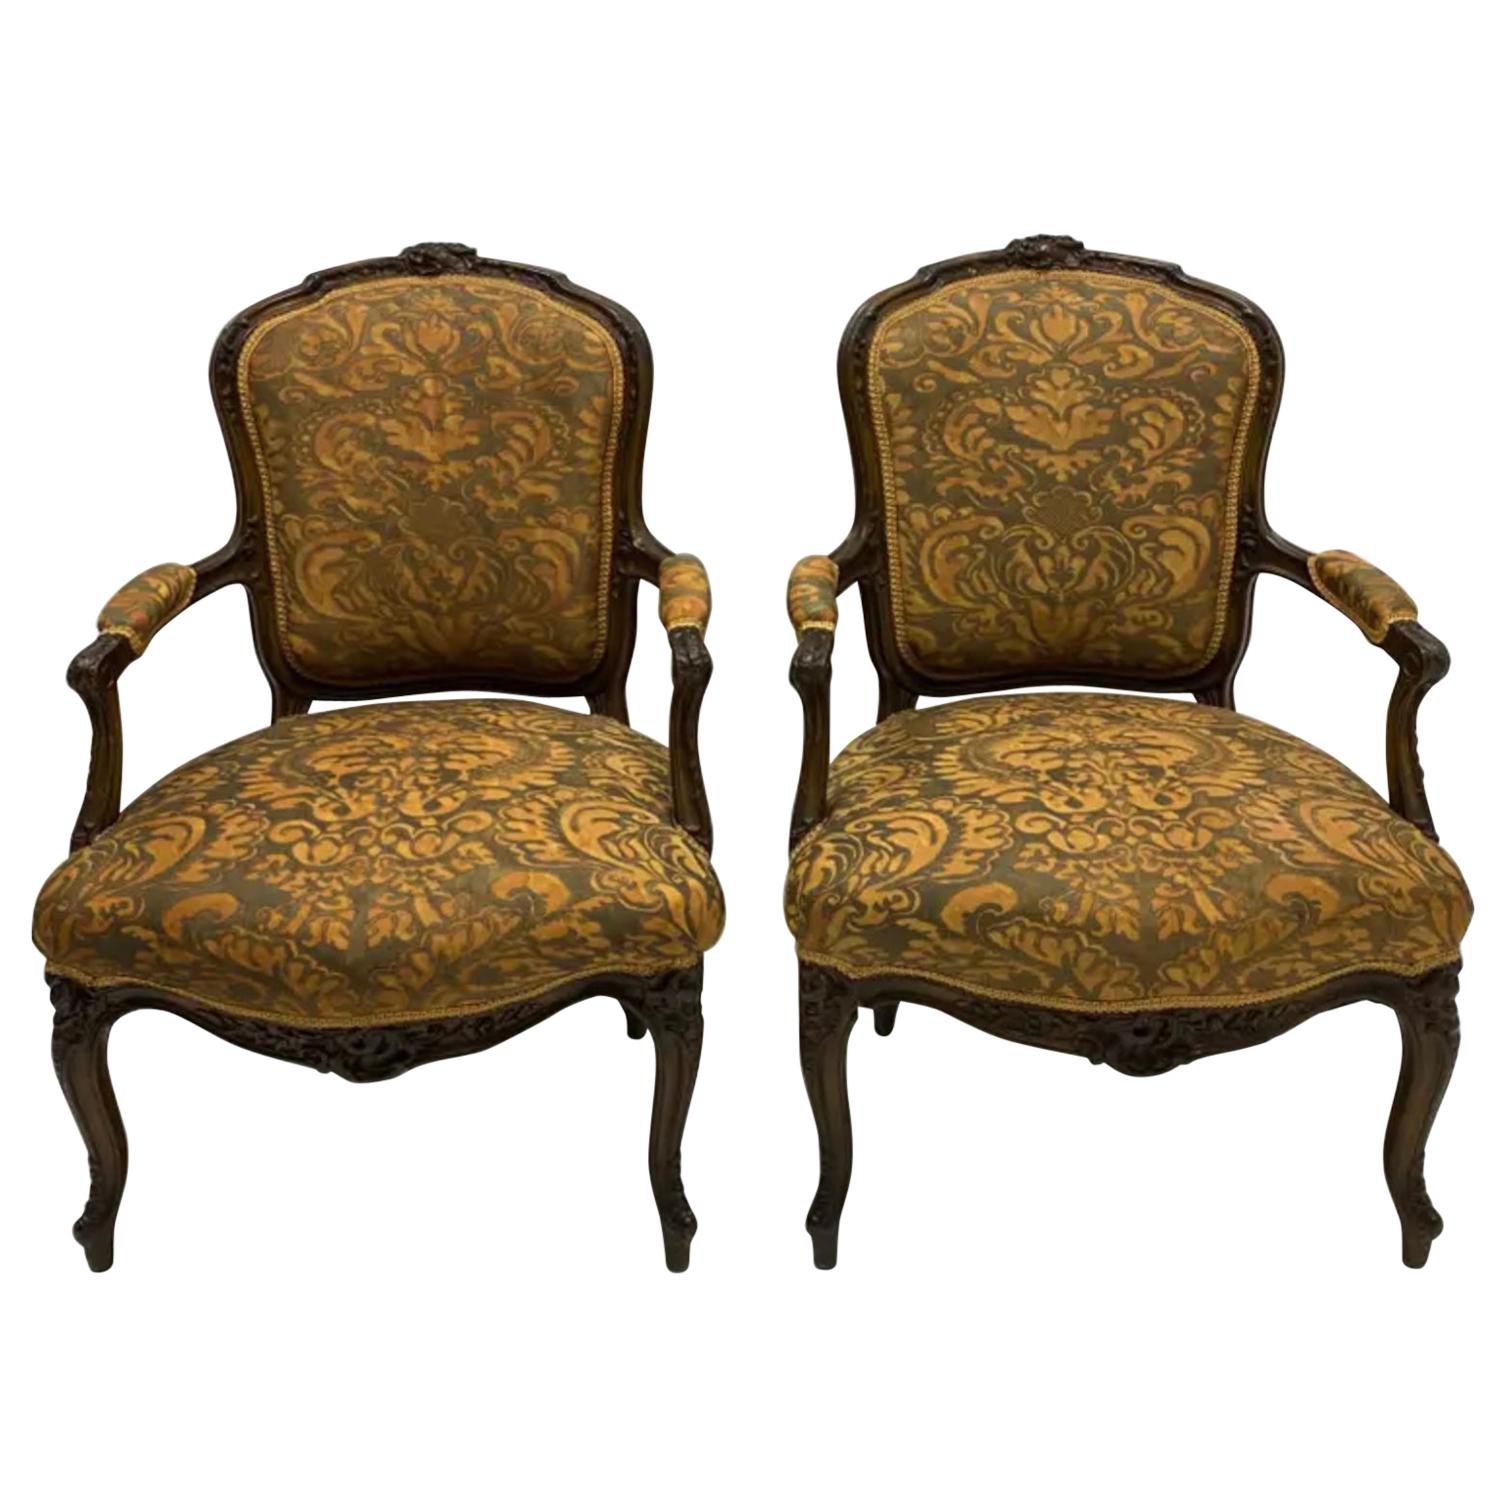 19th-C Carved French Bergere Chairs in Silk Fortuny Fabric, Pair